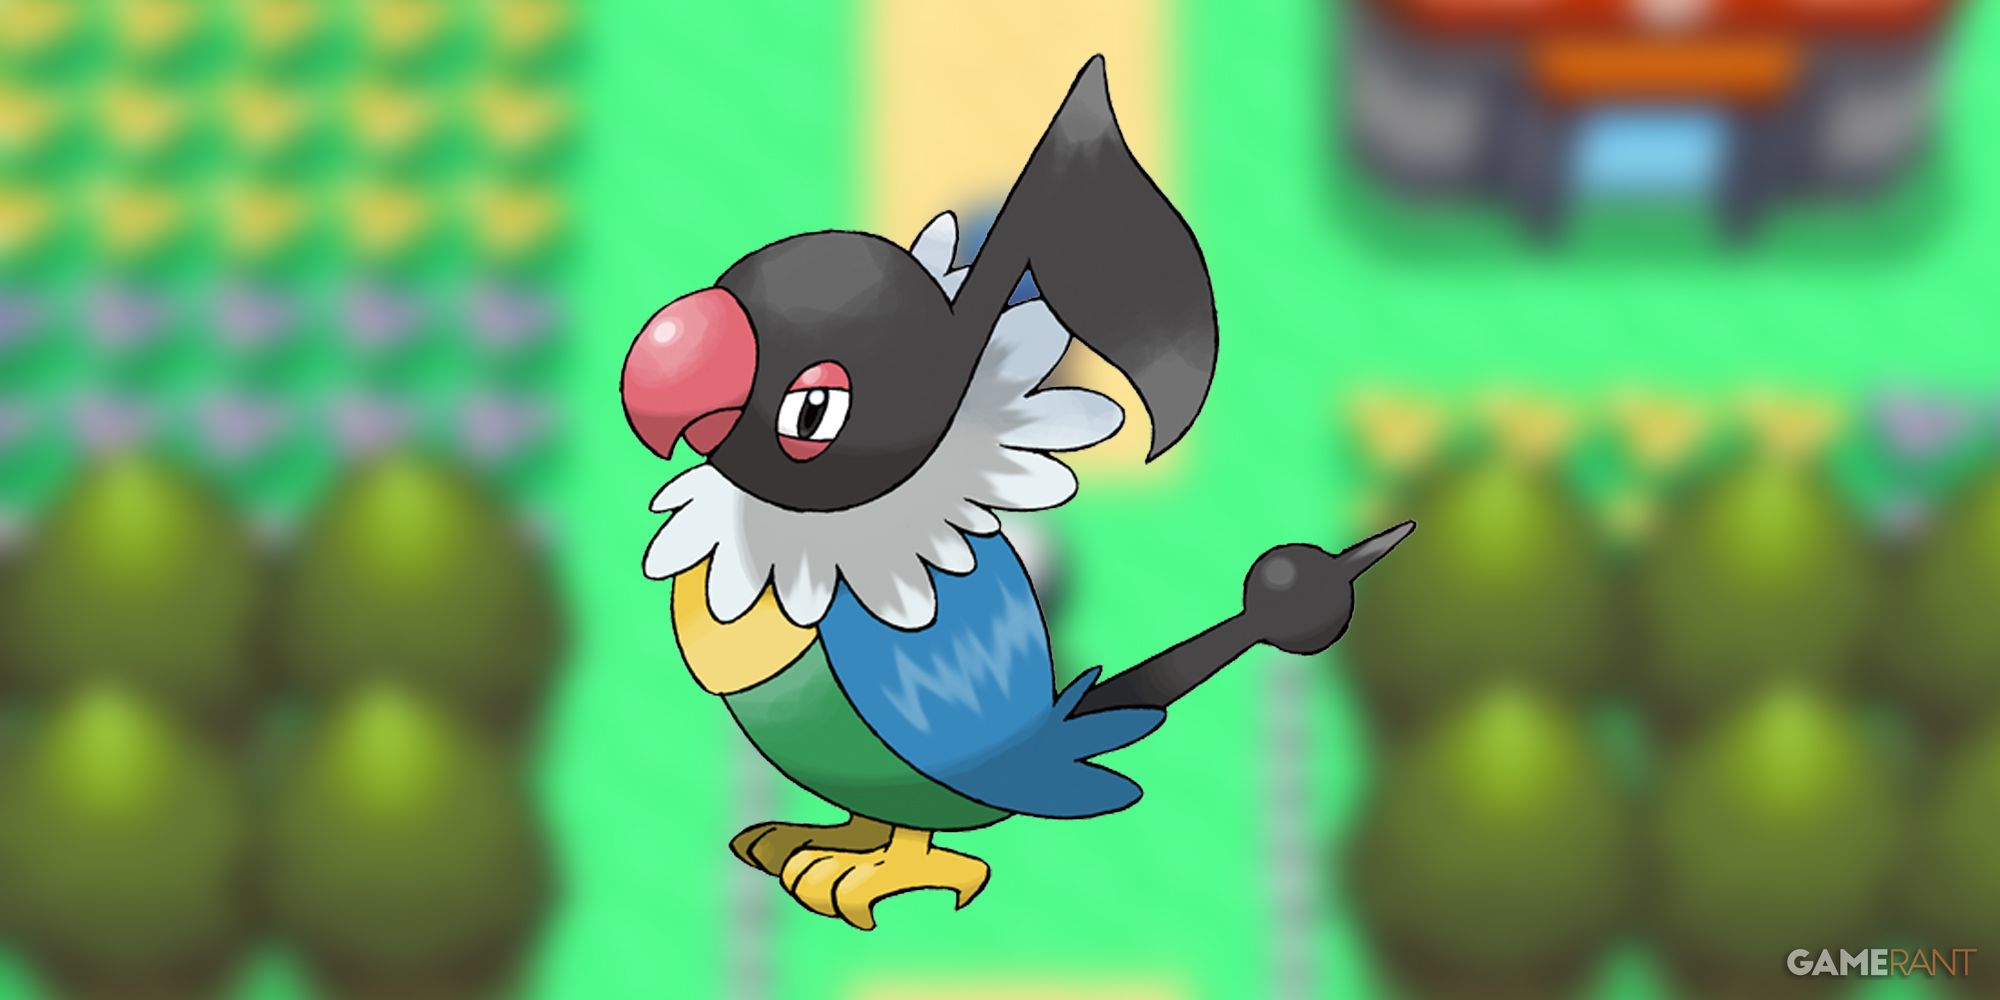 Chatot official artwork